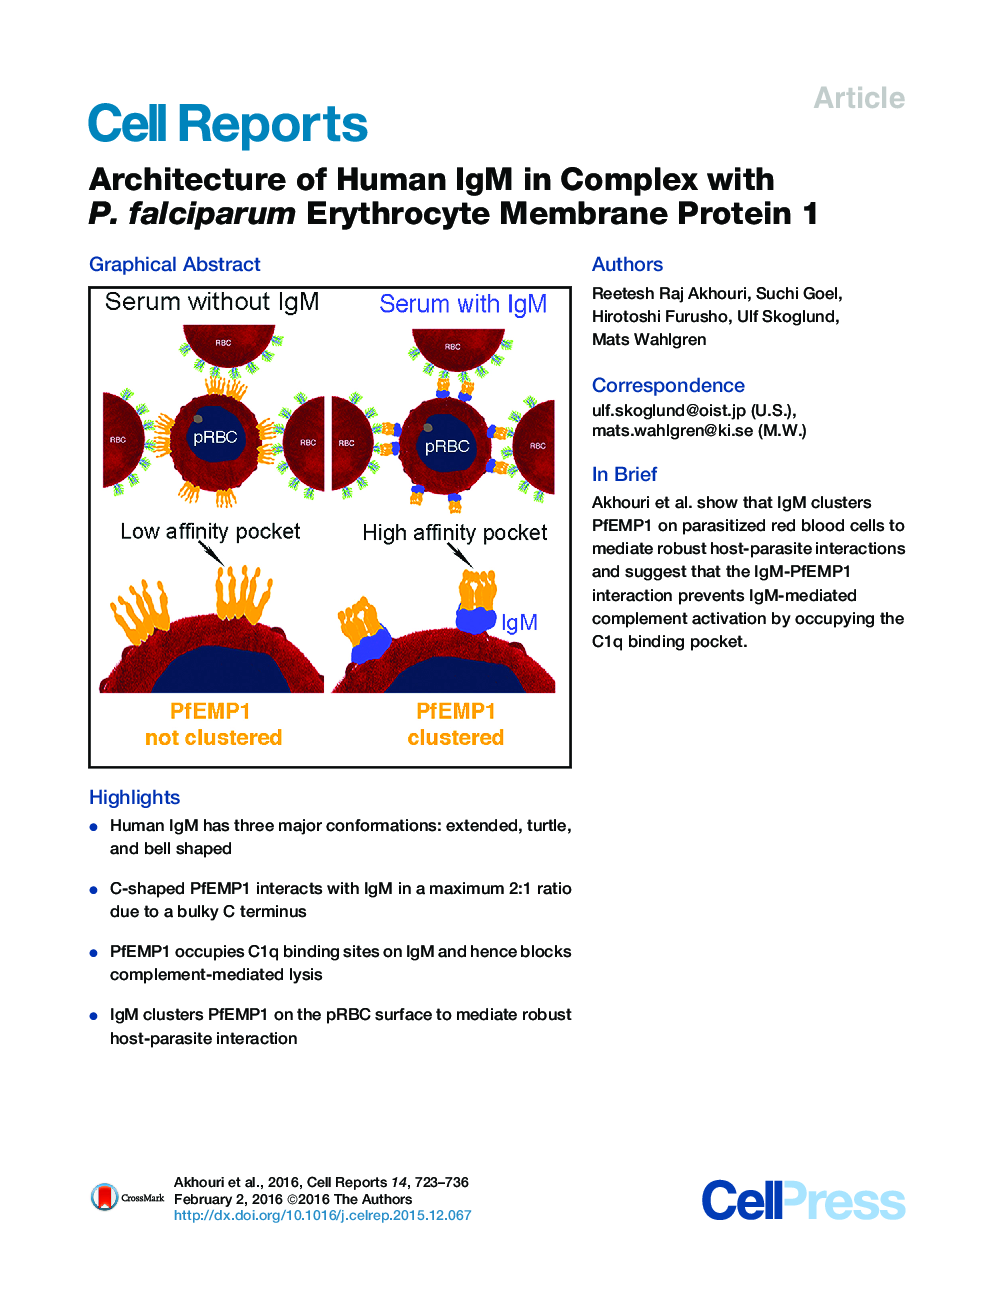 Architecture of Human IgM in Complex with P. falciparum Erythrocyte Membrane Protein 1 